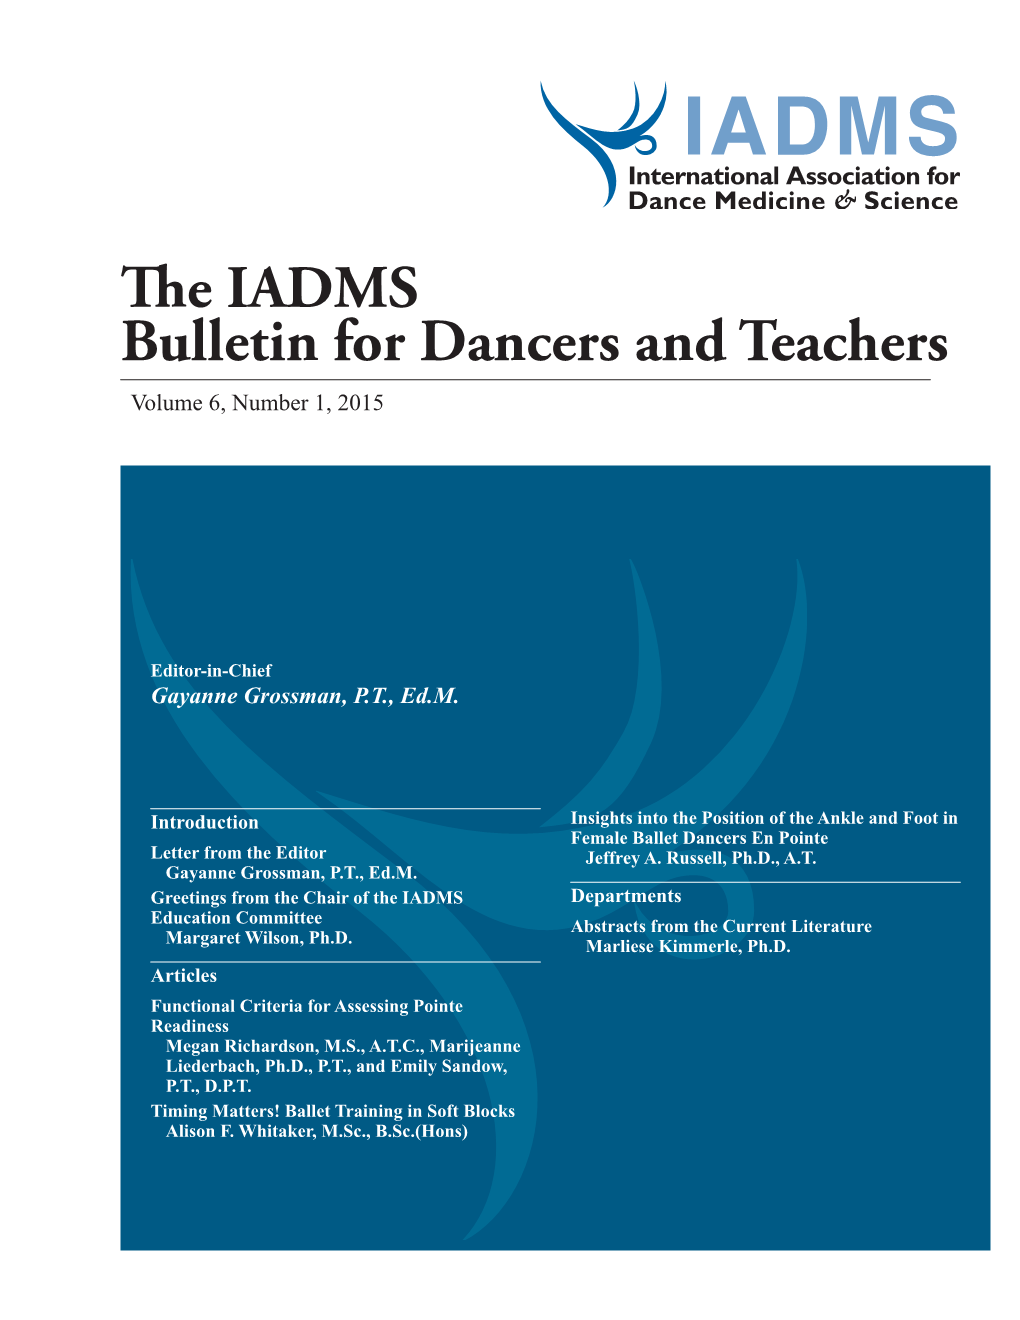 IADMS Bulletin for Dancers and Teachers Volume 6, Number 1, 2015